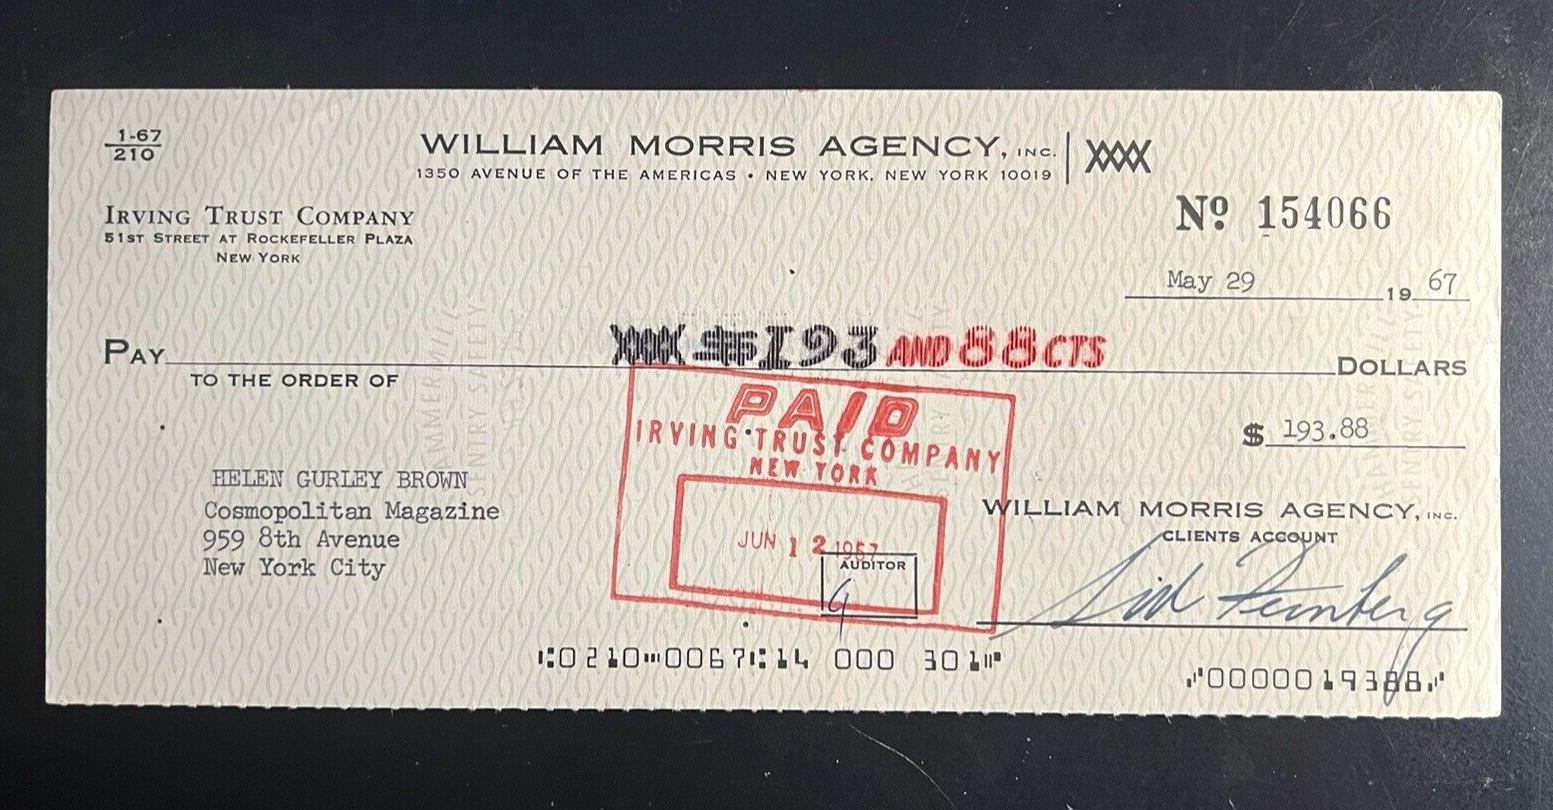 HELEN GURLEY BROWN SIGNED RARE ORIG. 1967 CHECK FROM WILLIAM MORRIS AGENCY